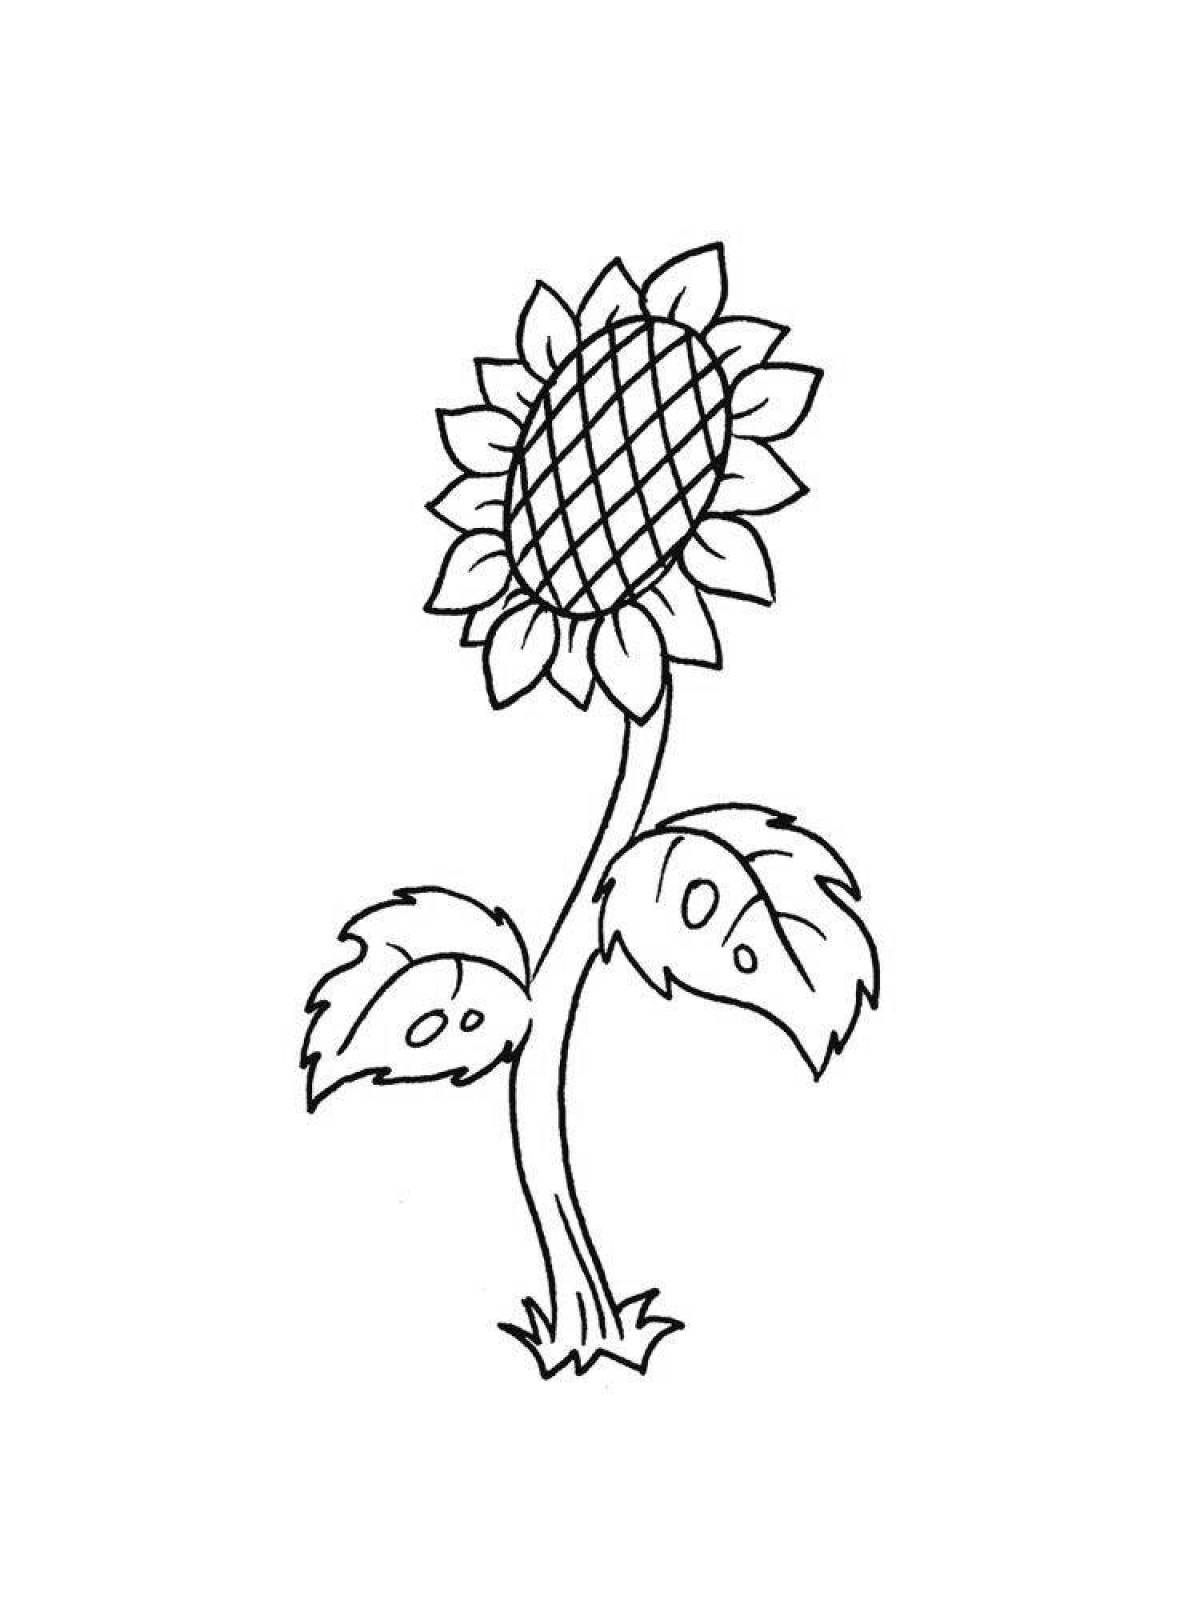 A fun sunflower coloring book for kids